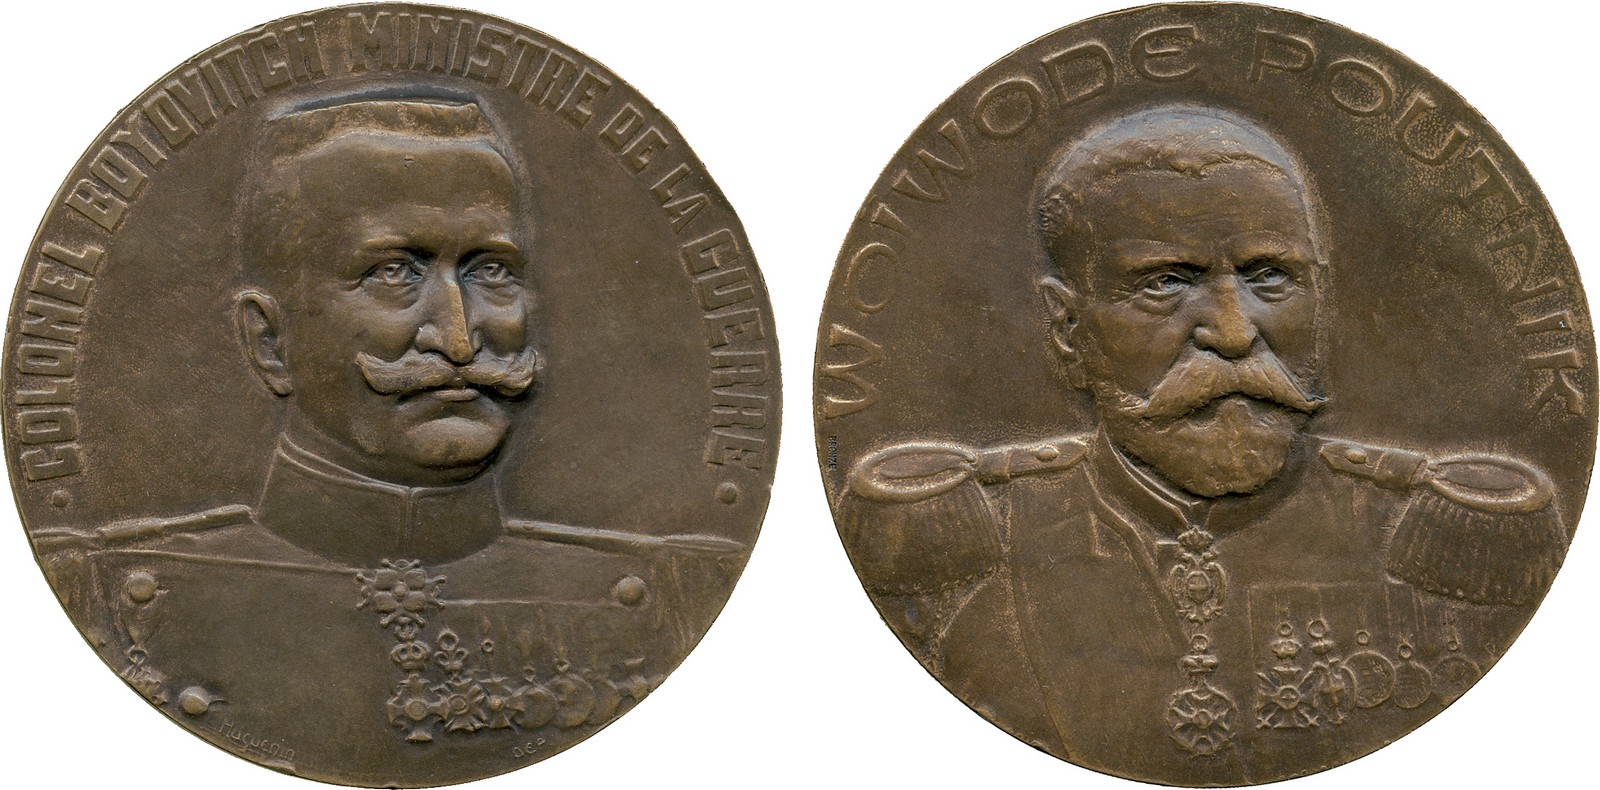 COMMEMORATIVE MEDALS, WORLD MEDALS, Medals of the Axis, Germany, Serbia, Colonel Boyovitch, Minister